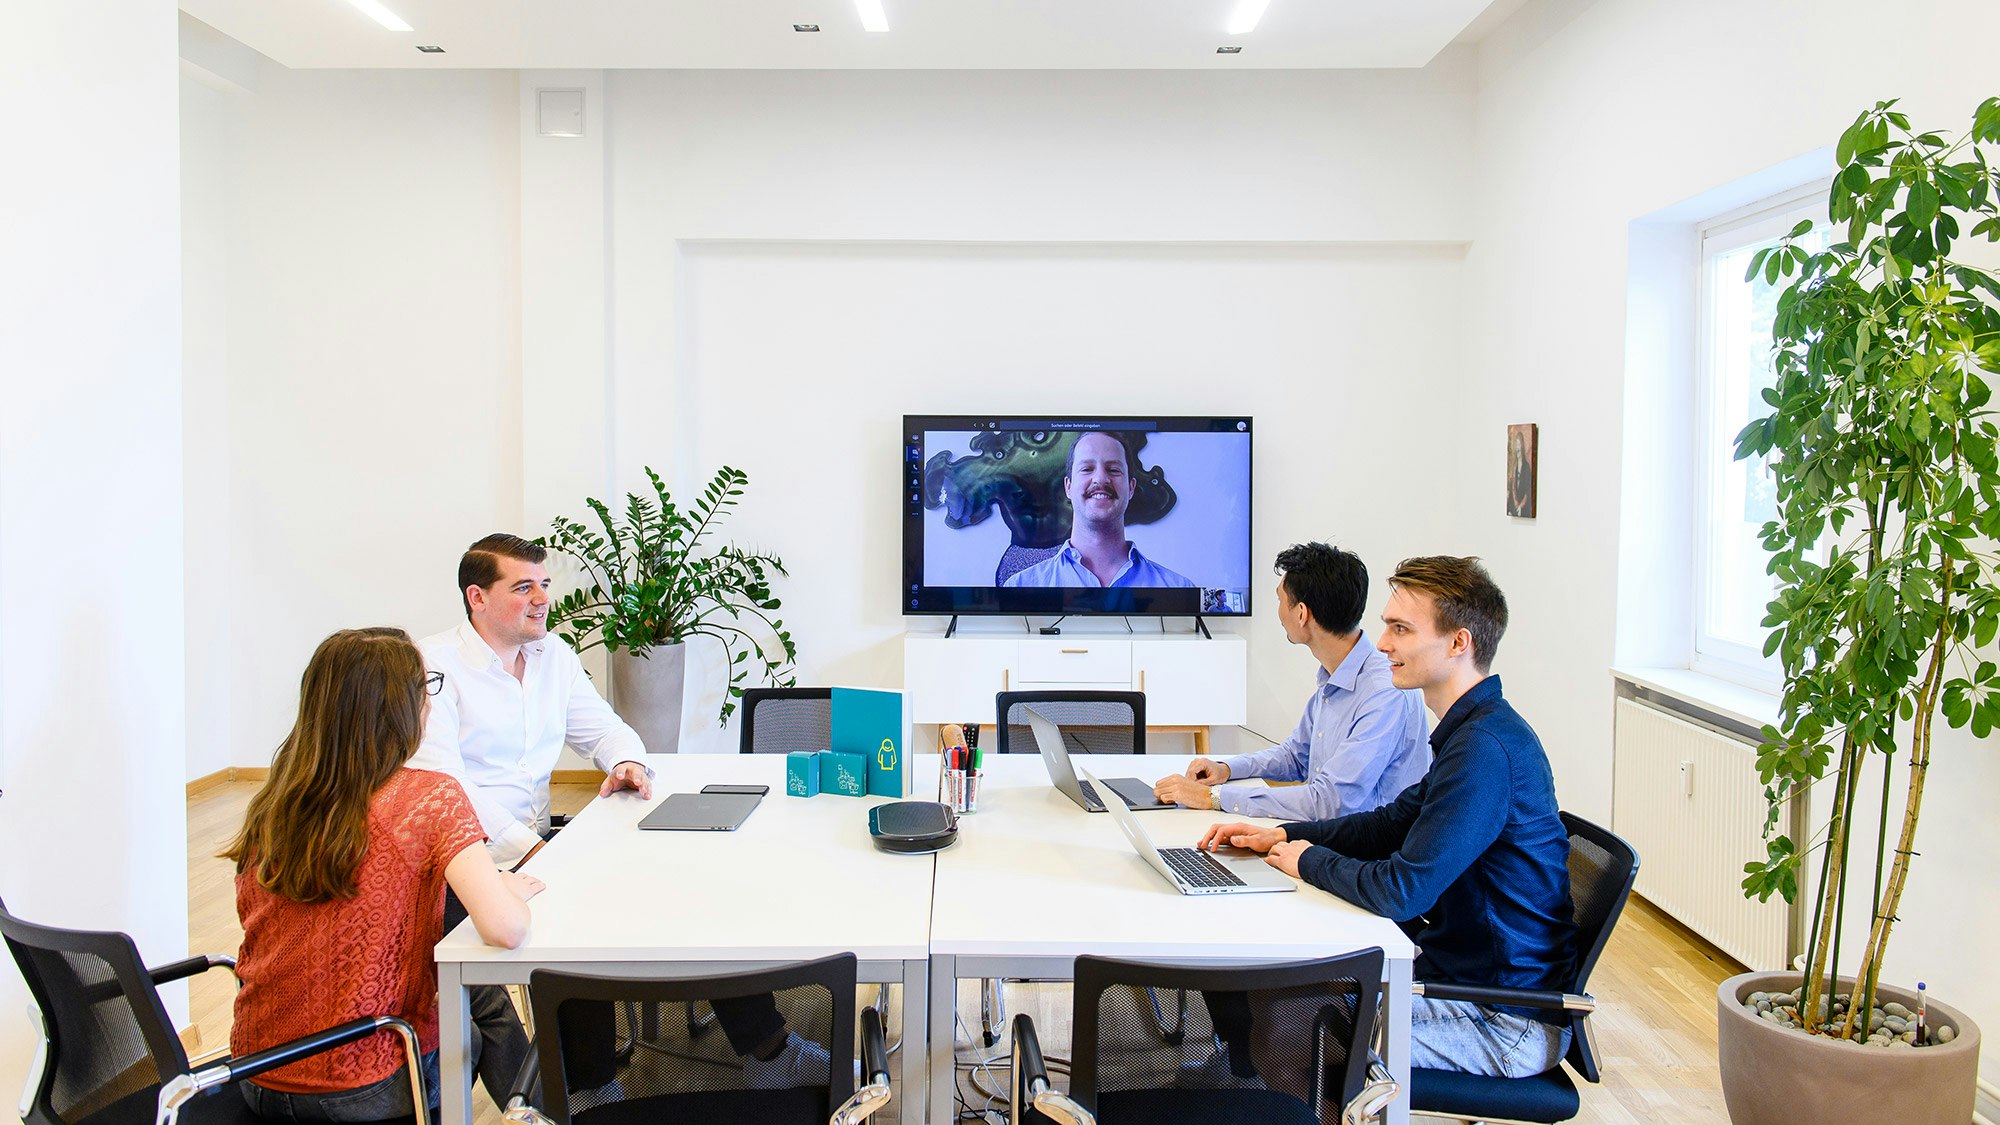 In the conference room, four colleagues are having a meeting via video broadcast on a large TV.